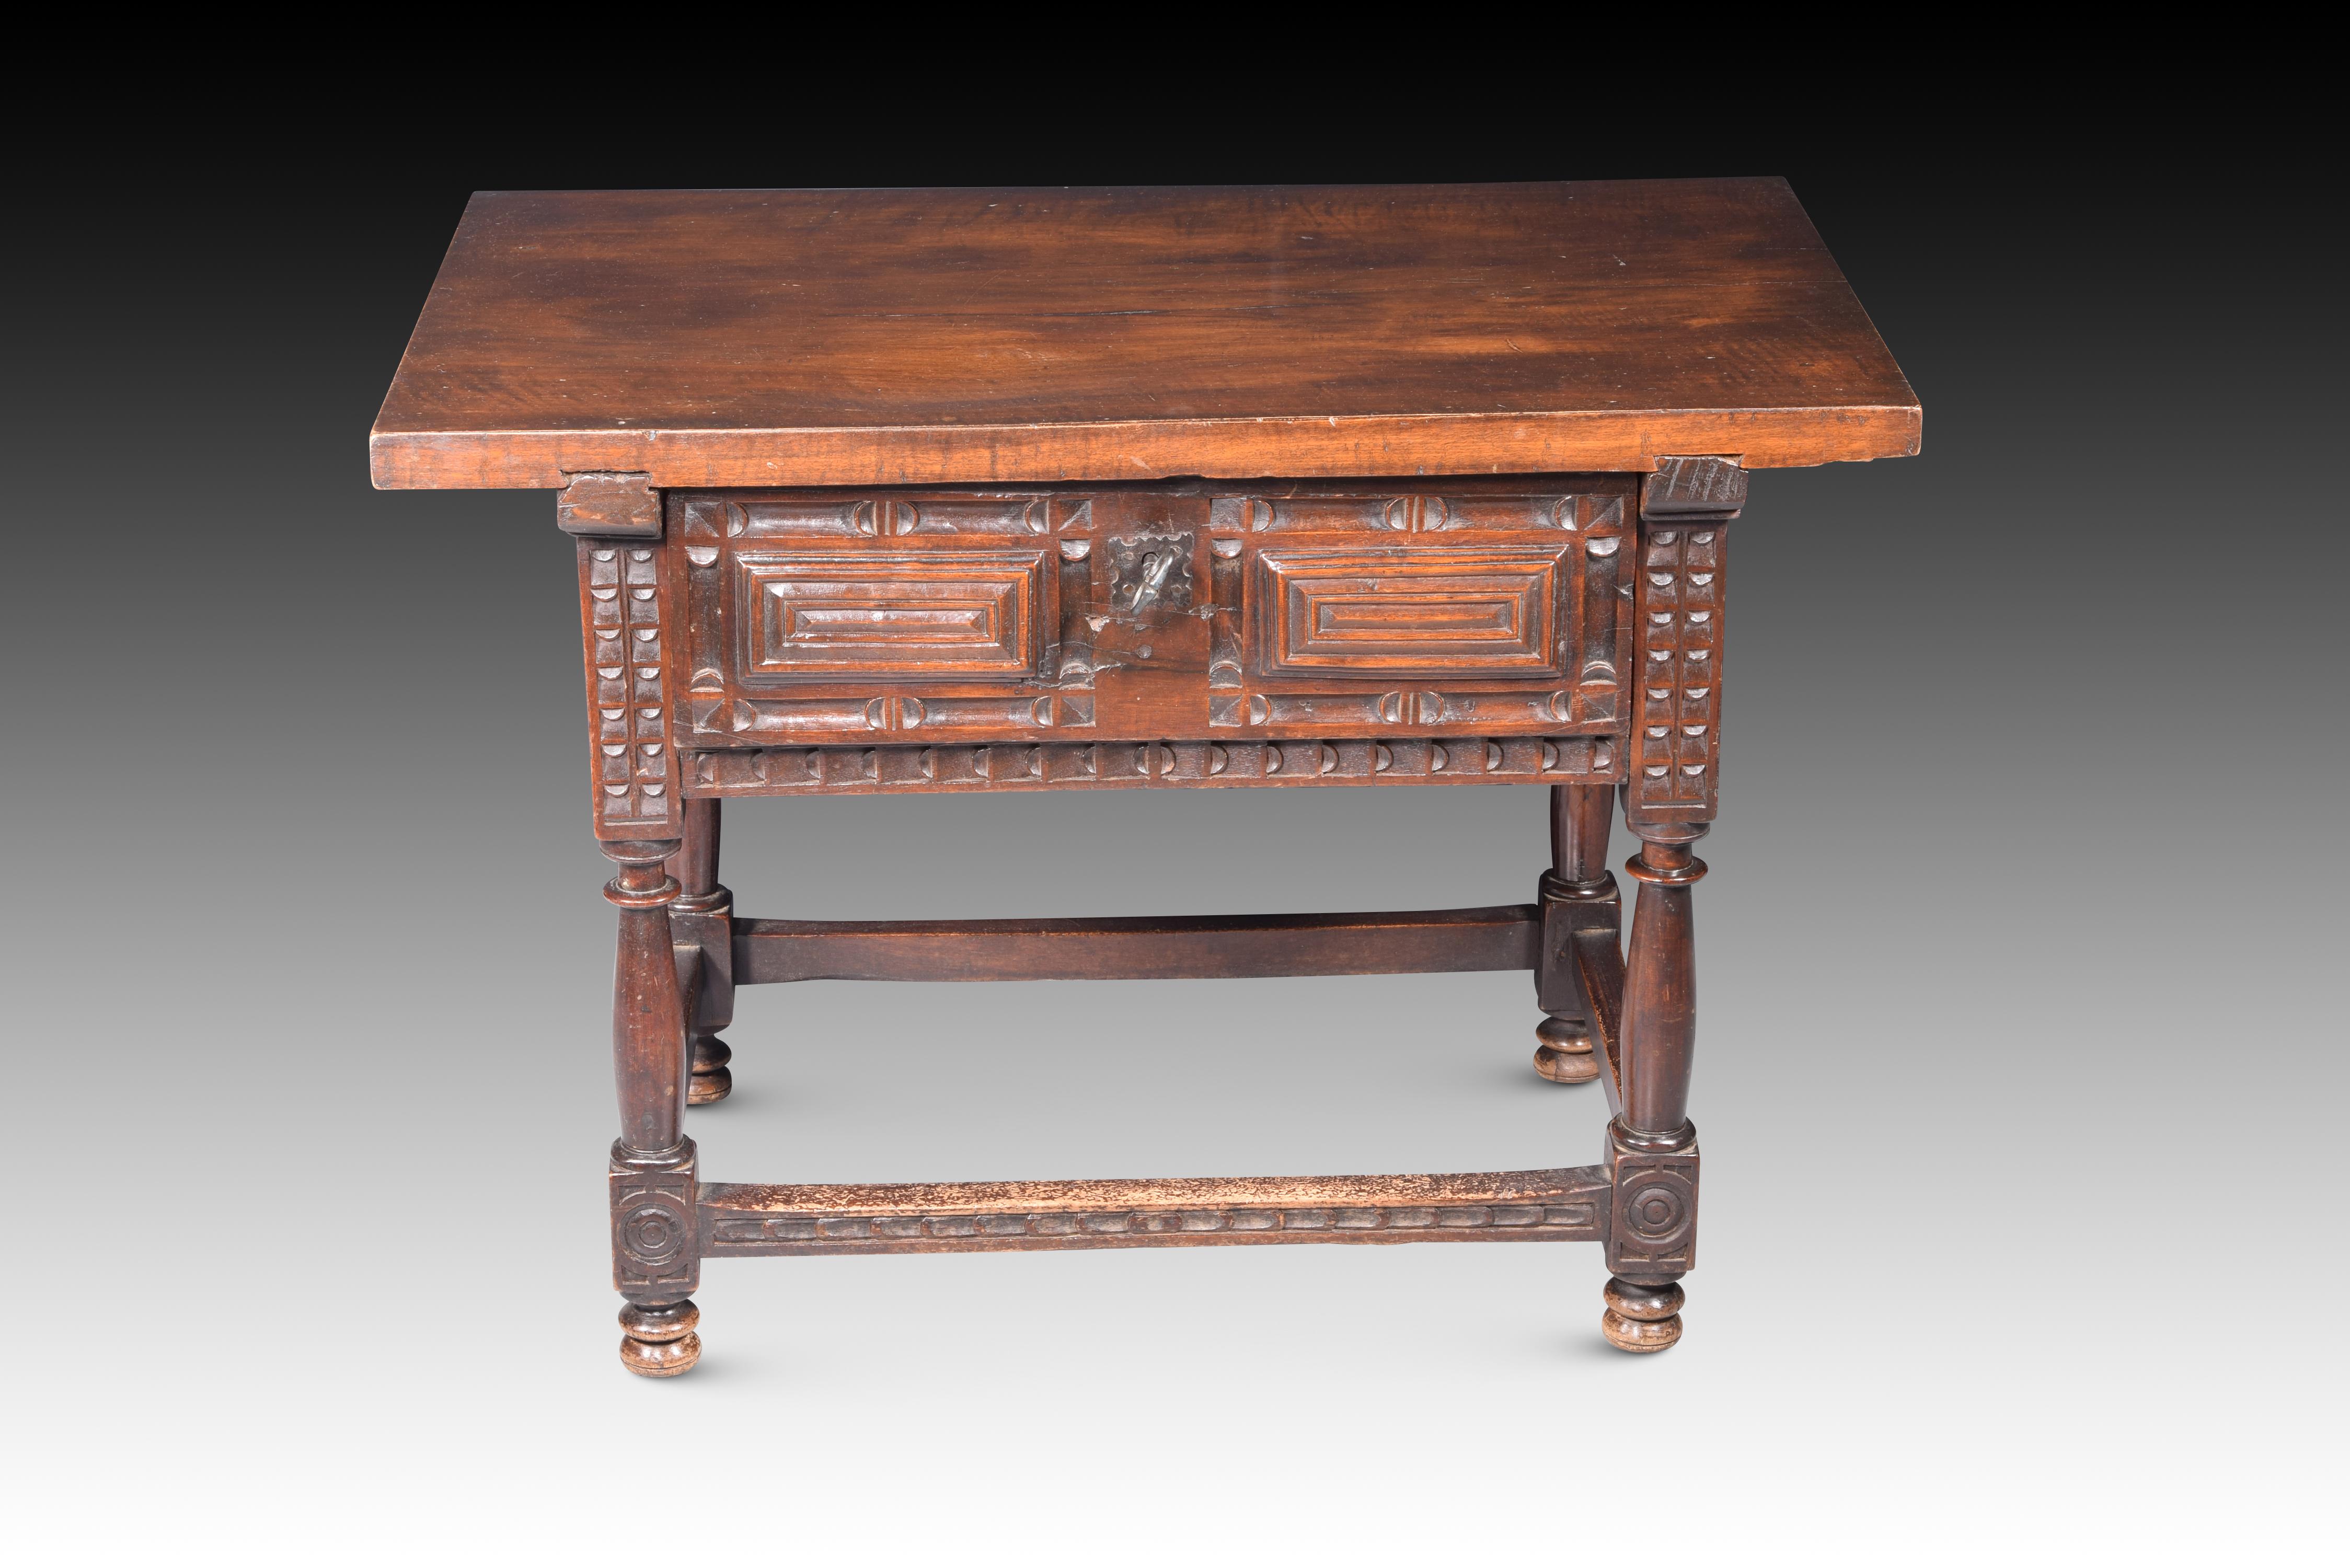 Castilian table. Walnut wood, iron. Spain, 17th century.
Restored (brushed) tabletop.
Walnut table with four column-shaped legs, ending at the bottom in carved cubes on the fronts with geometric elements on which there are two circular forms; these